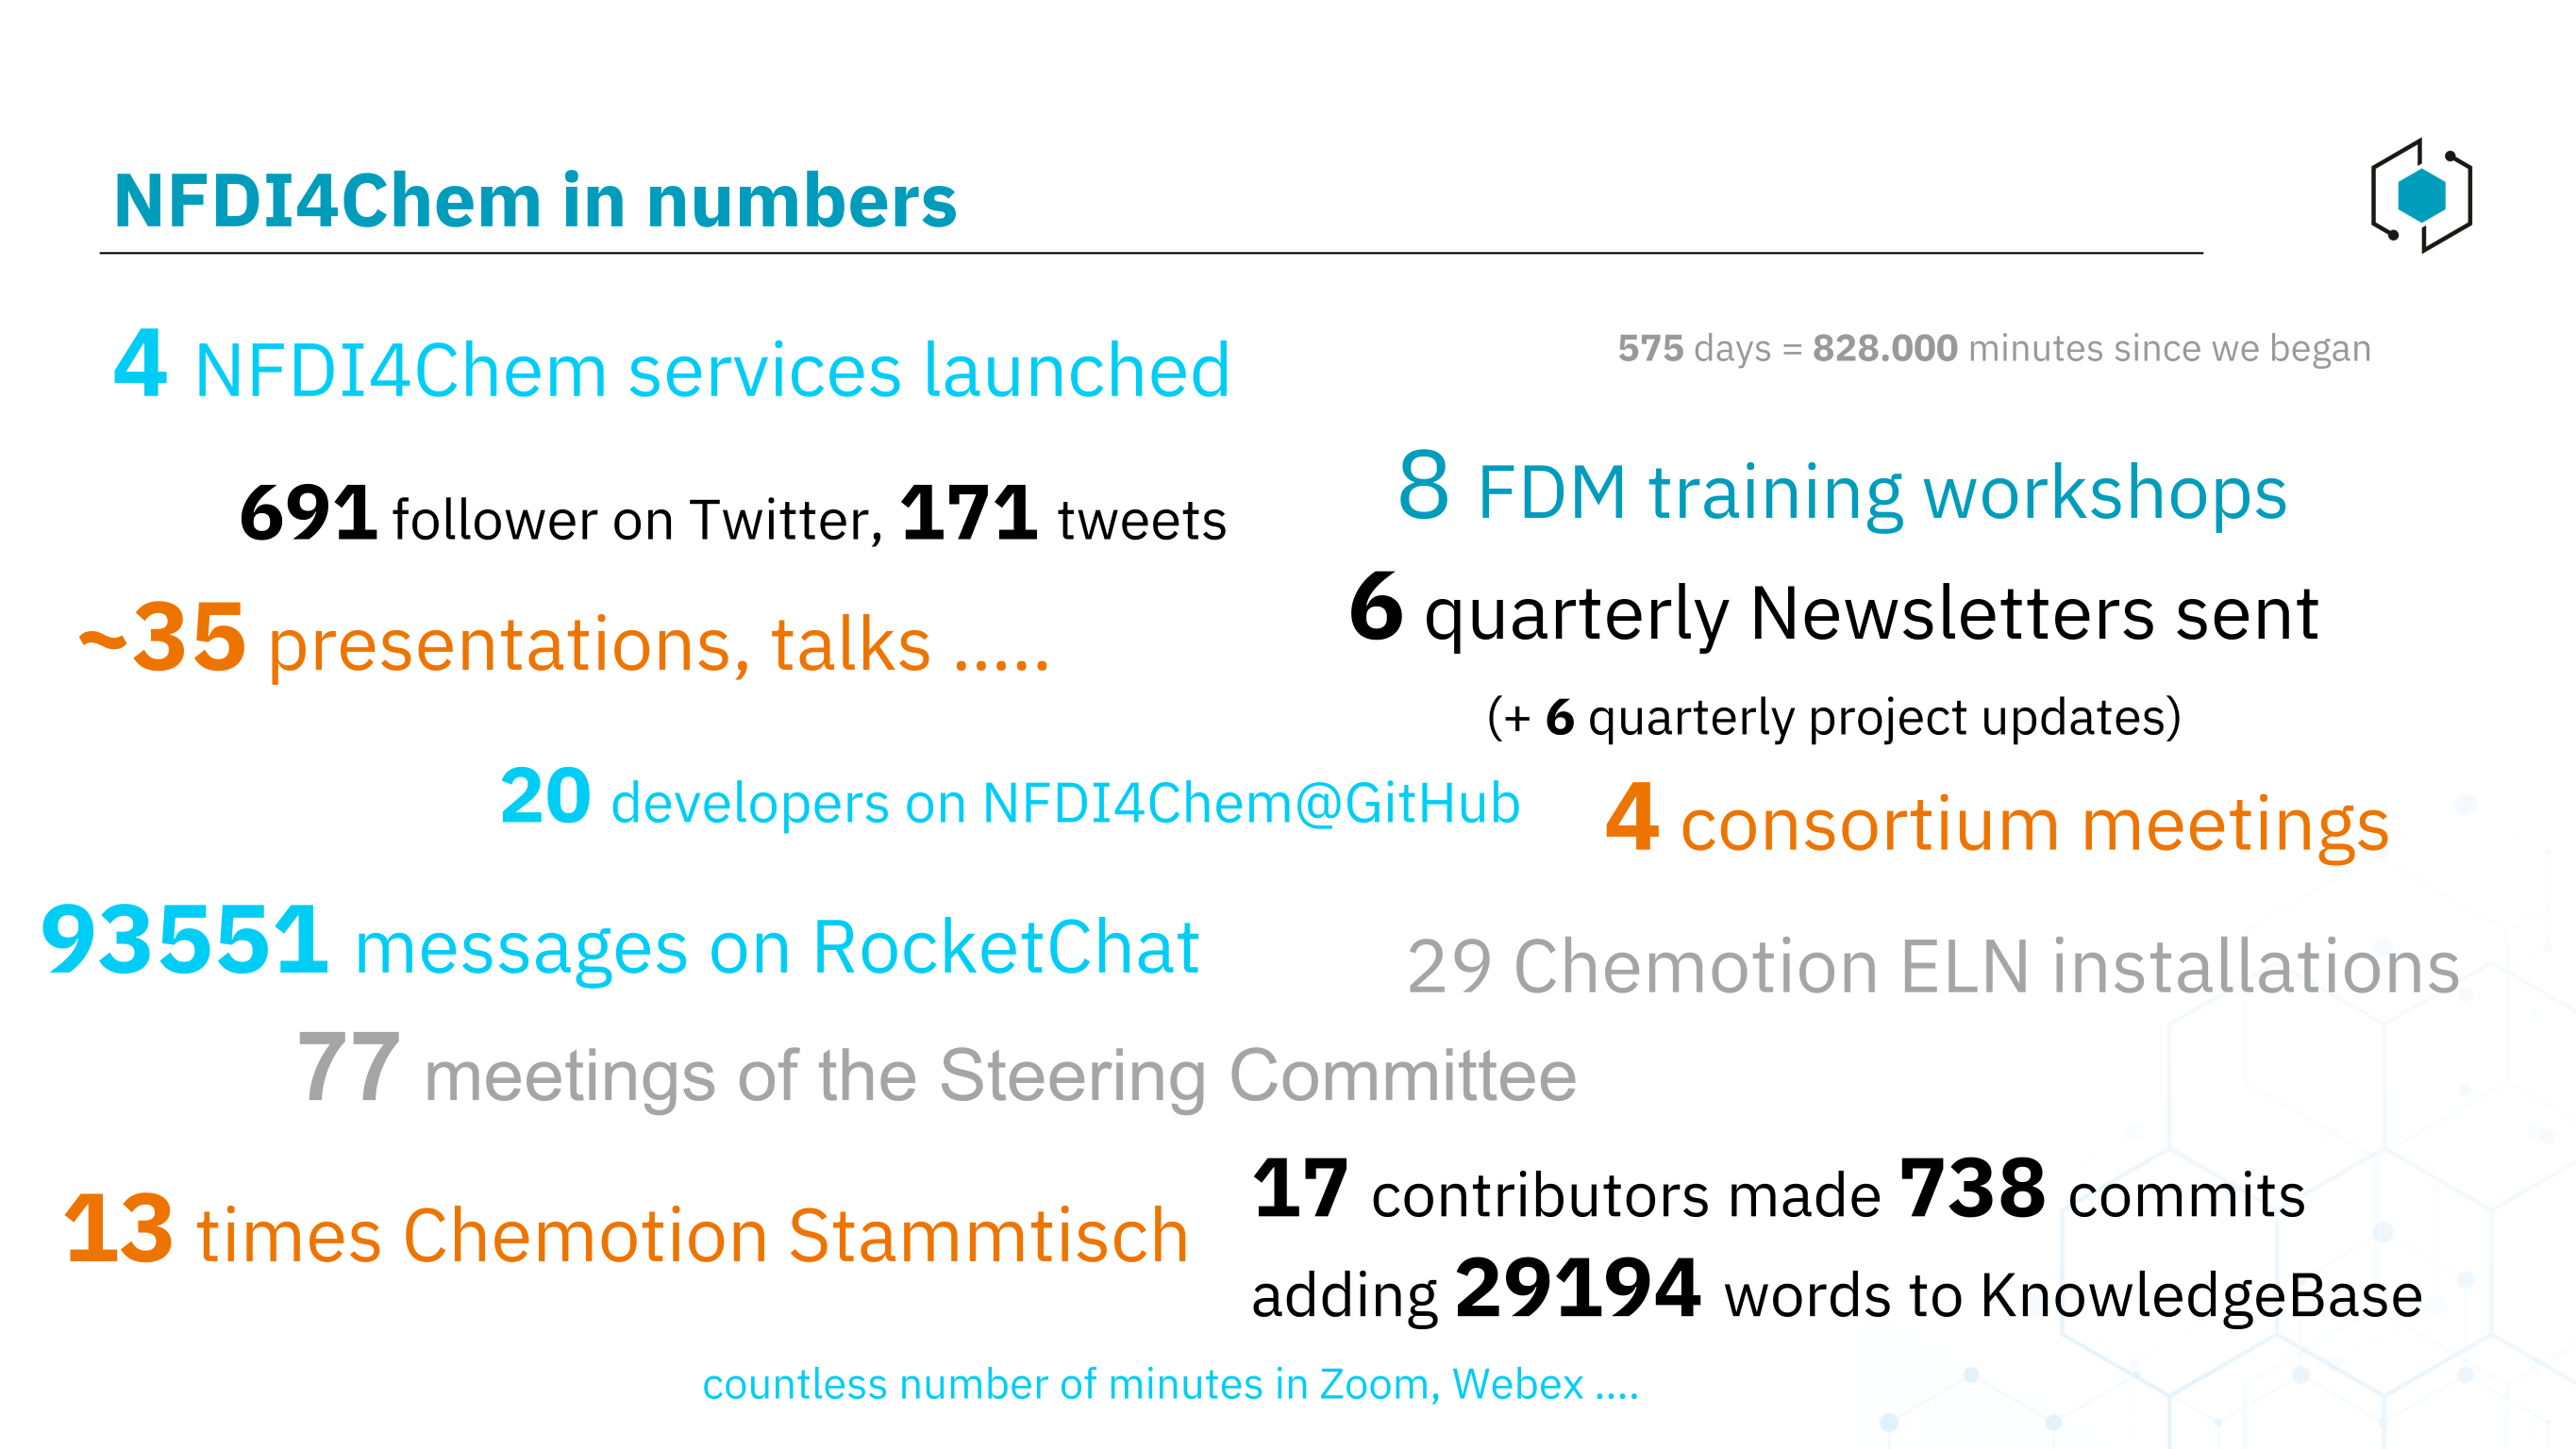 Grafic about NFDI4Chem in numbers shows the work on connecting the dots.